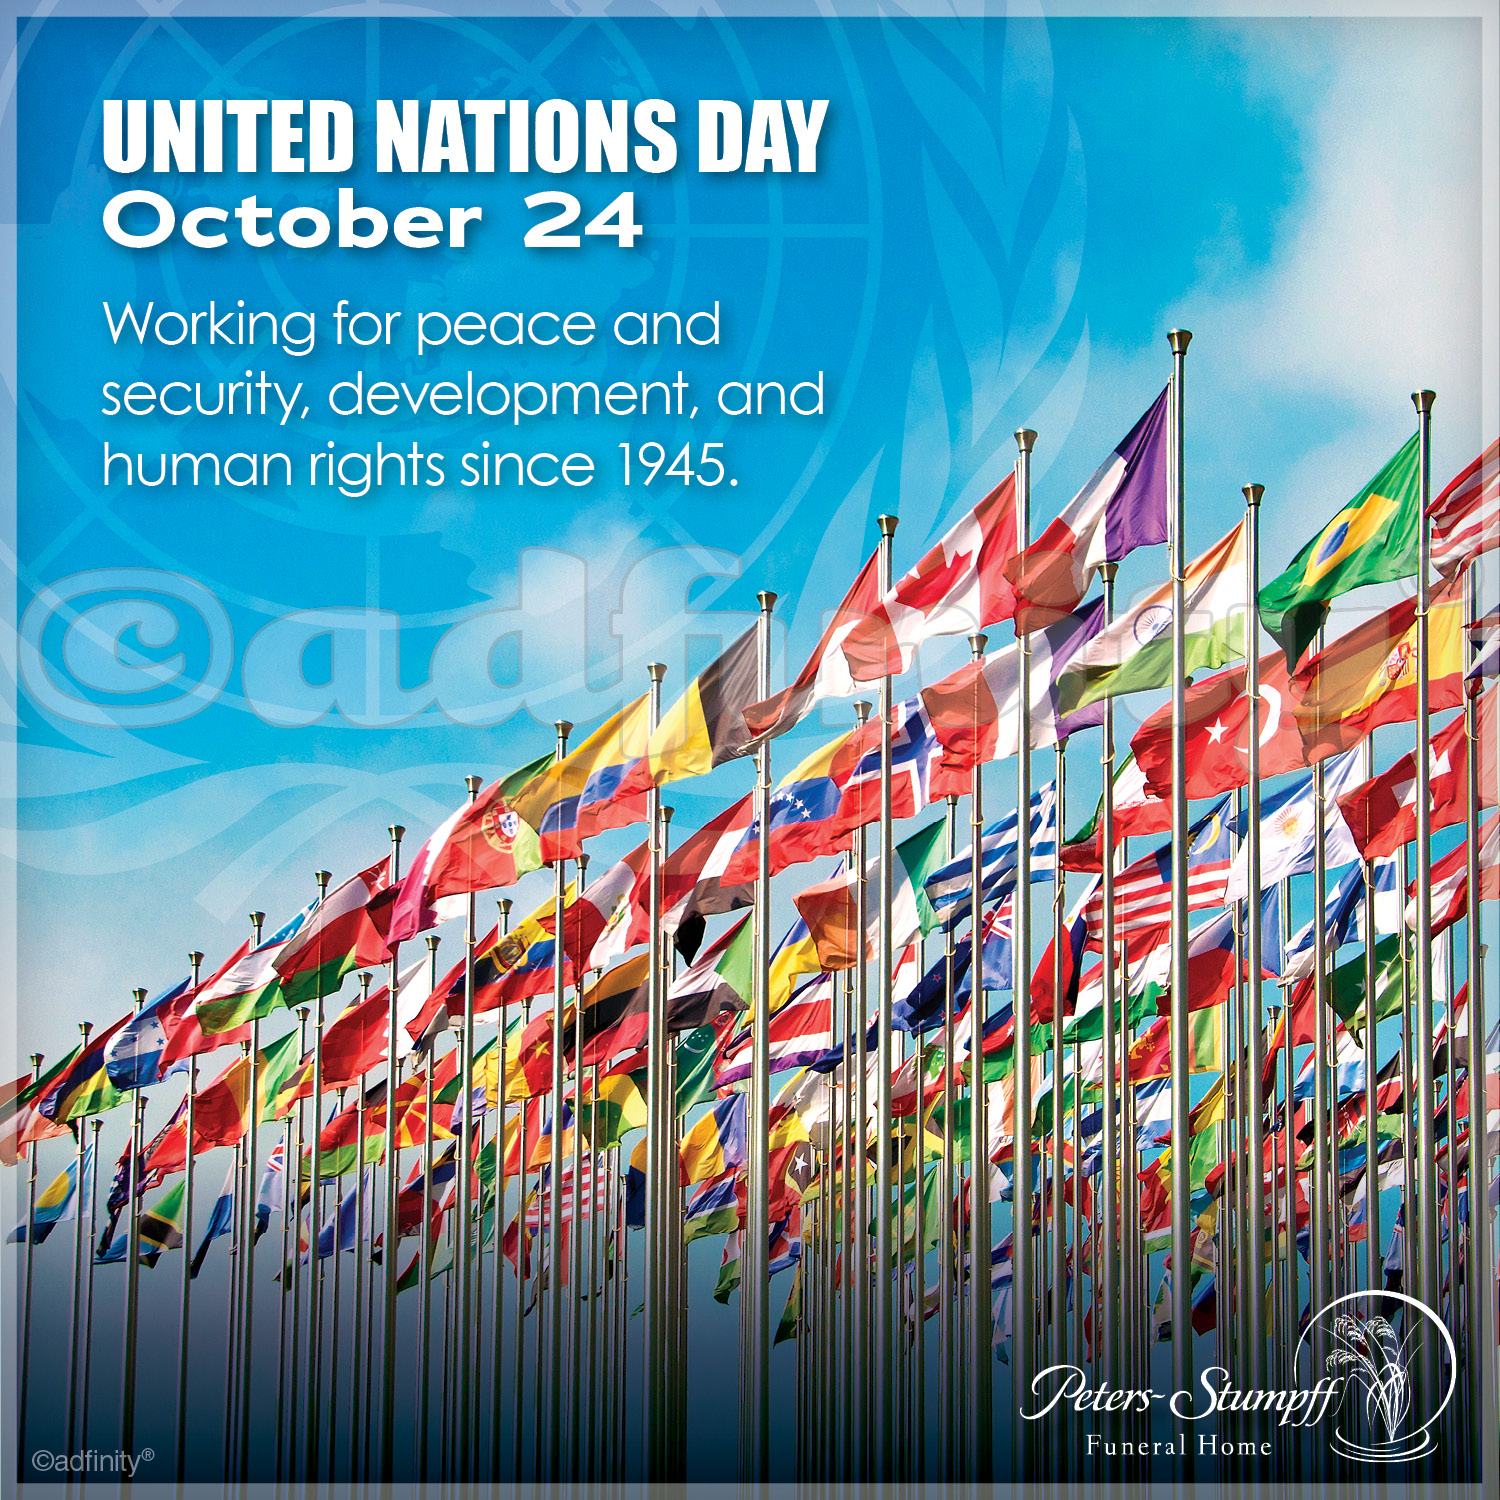 united nations day october 24 working for peace and security, development and human rights since 19445